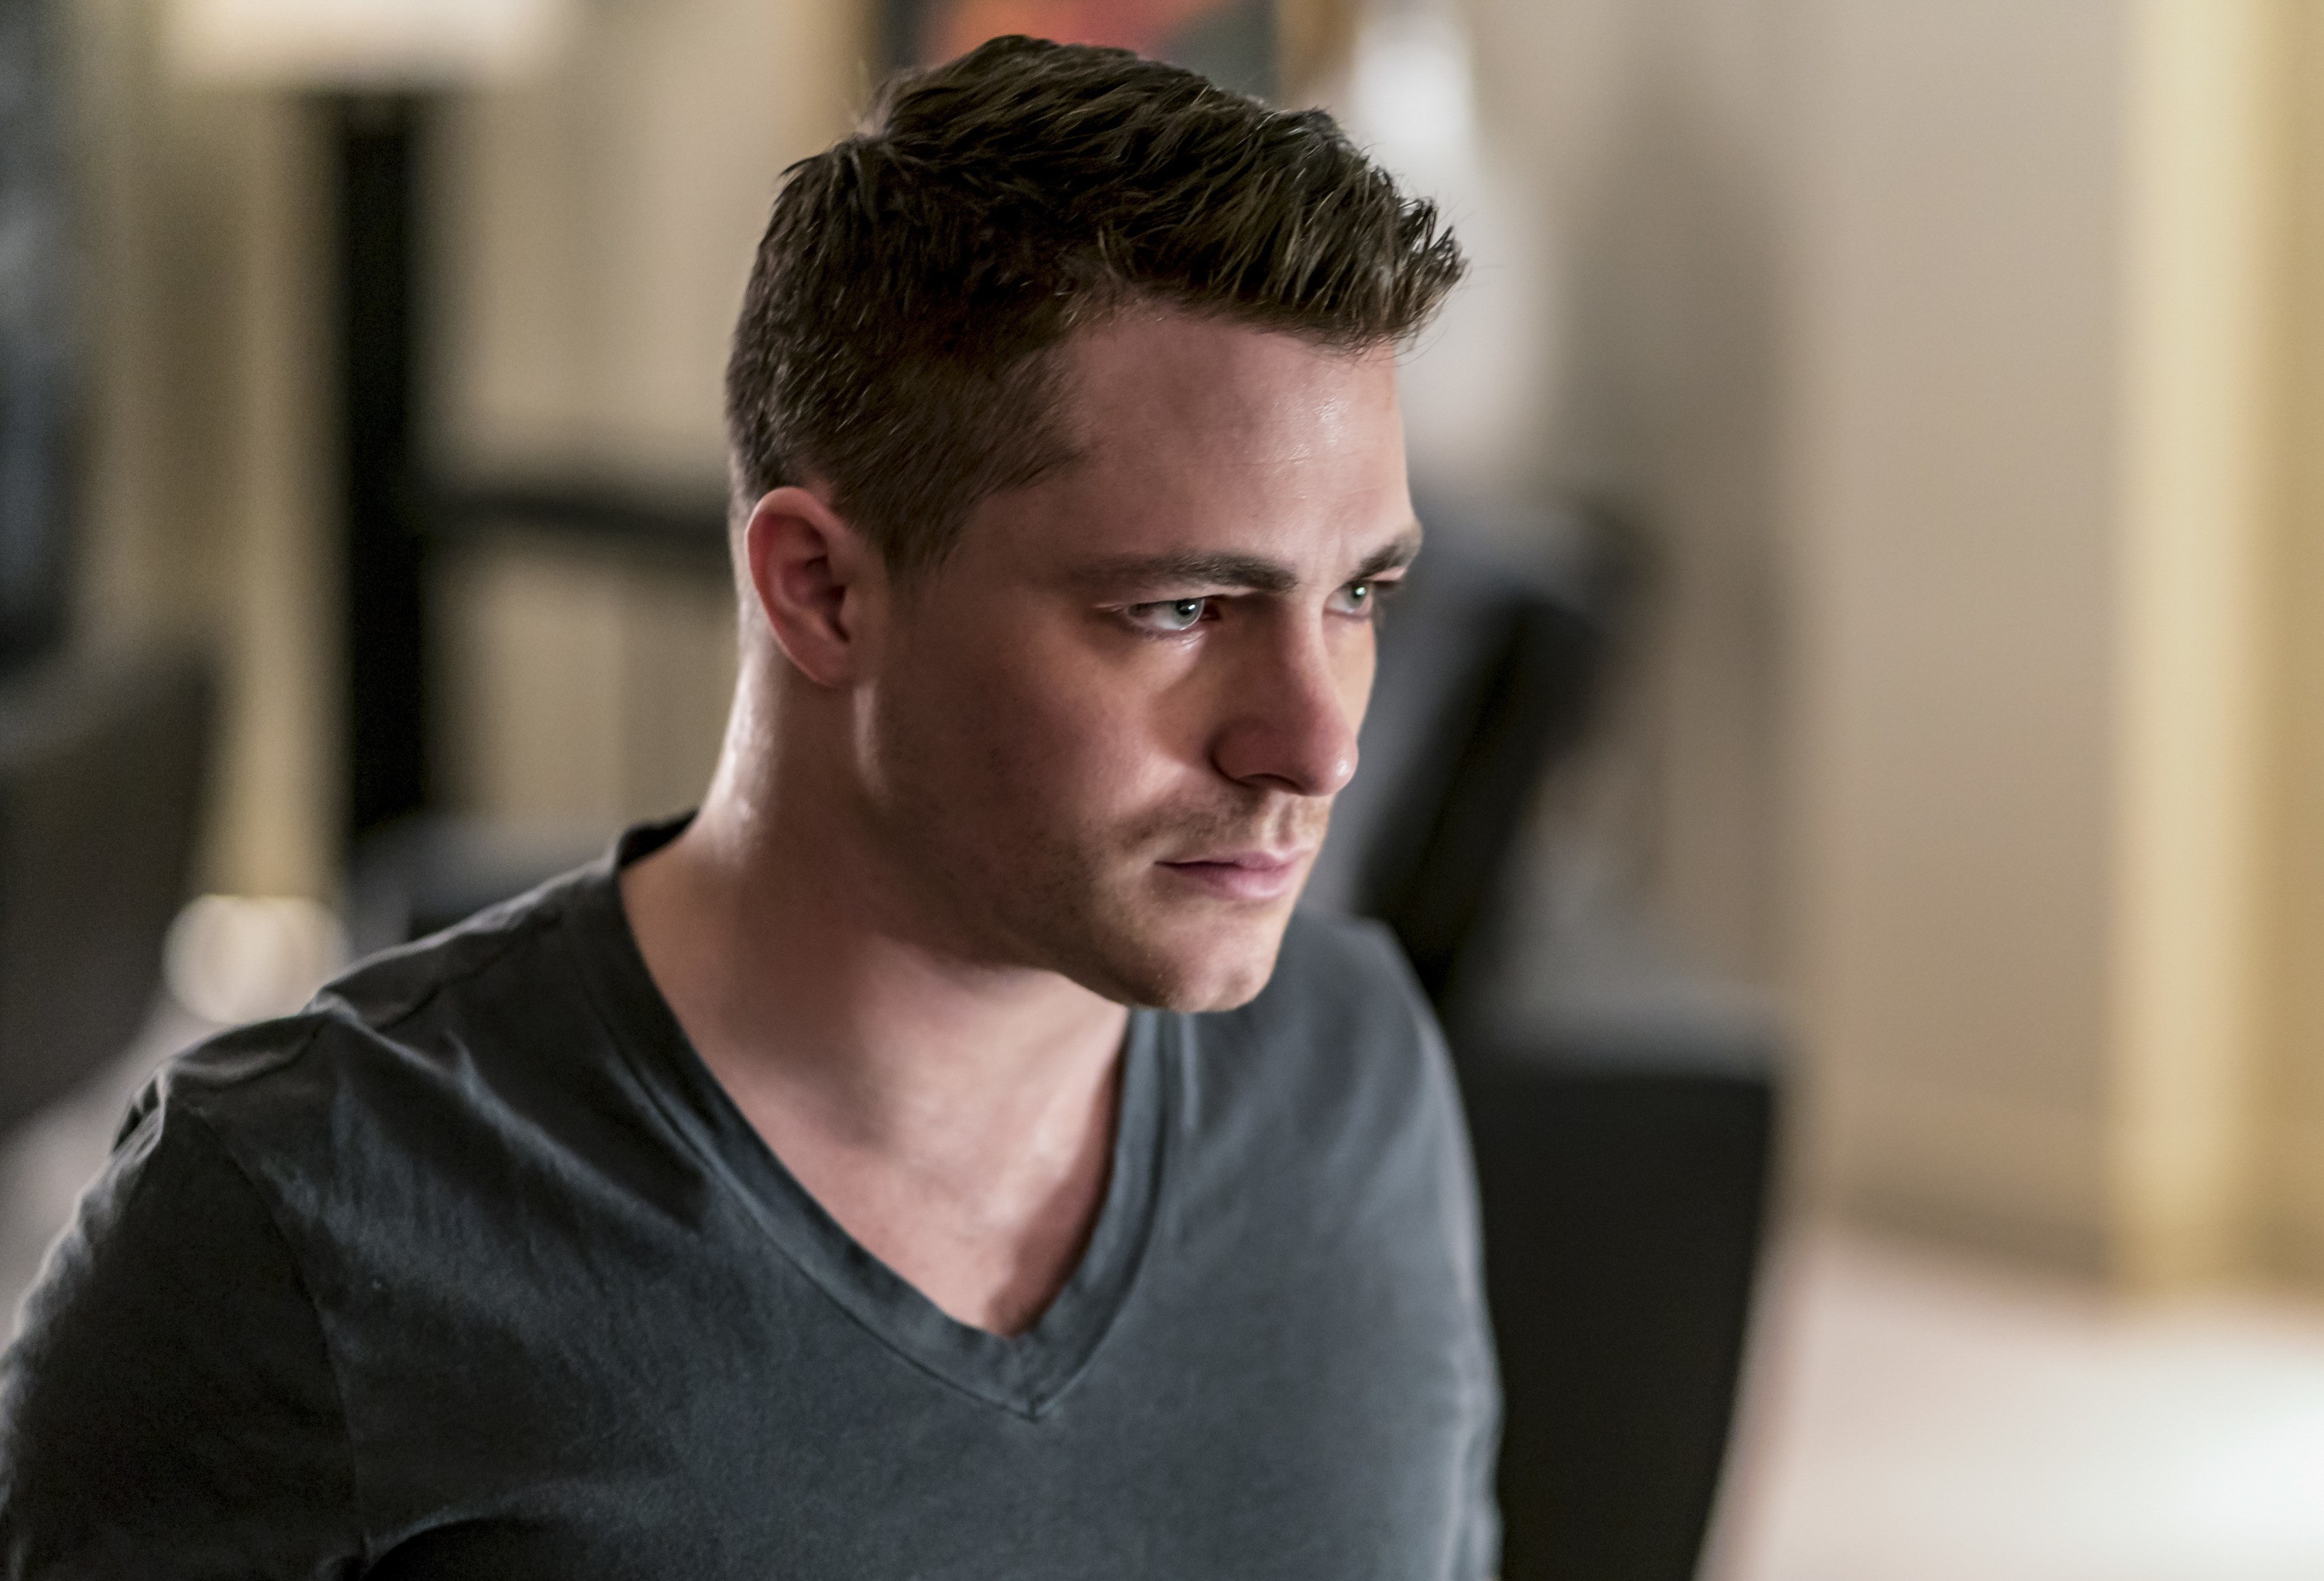 Arrow Speedy Suits Up Again To Save Roy Harper In New Photos From Season 6 Episode 15 1119